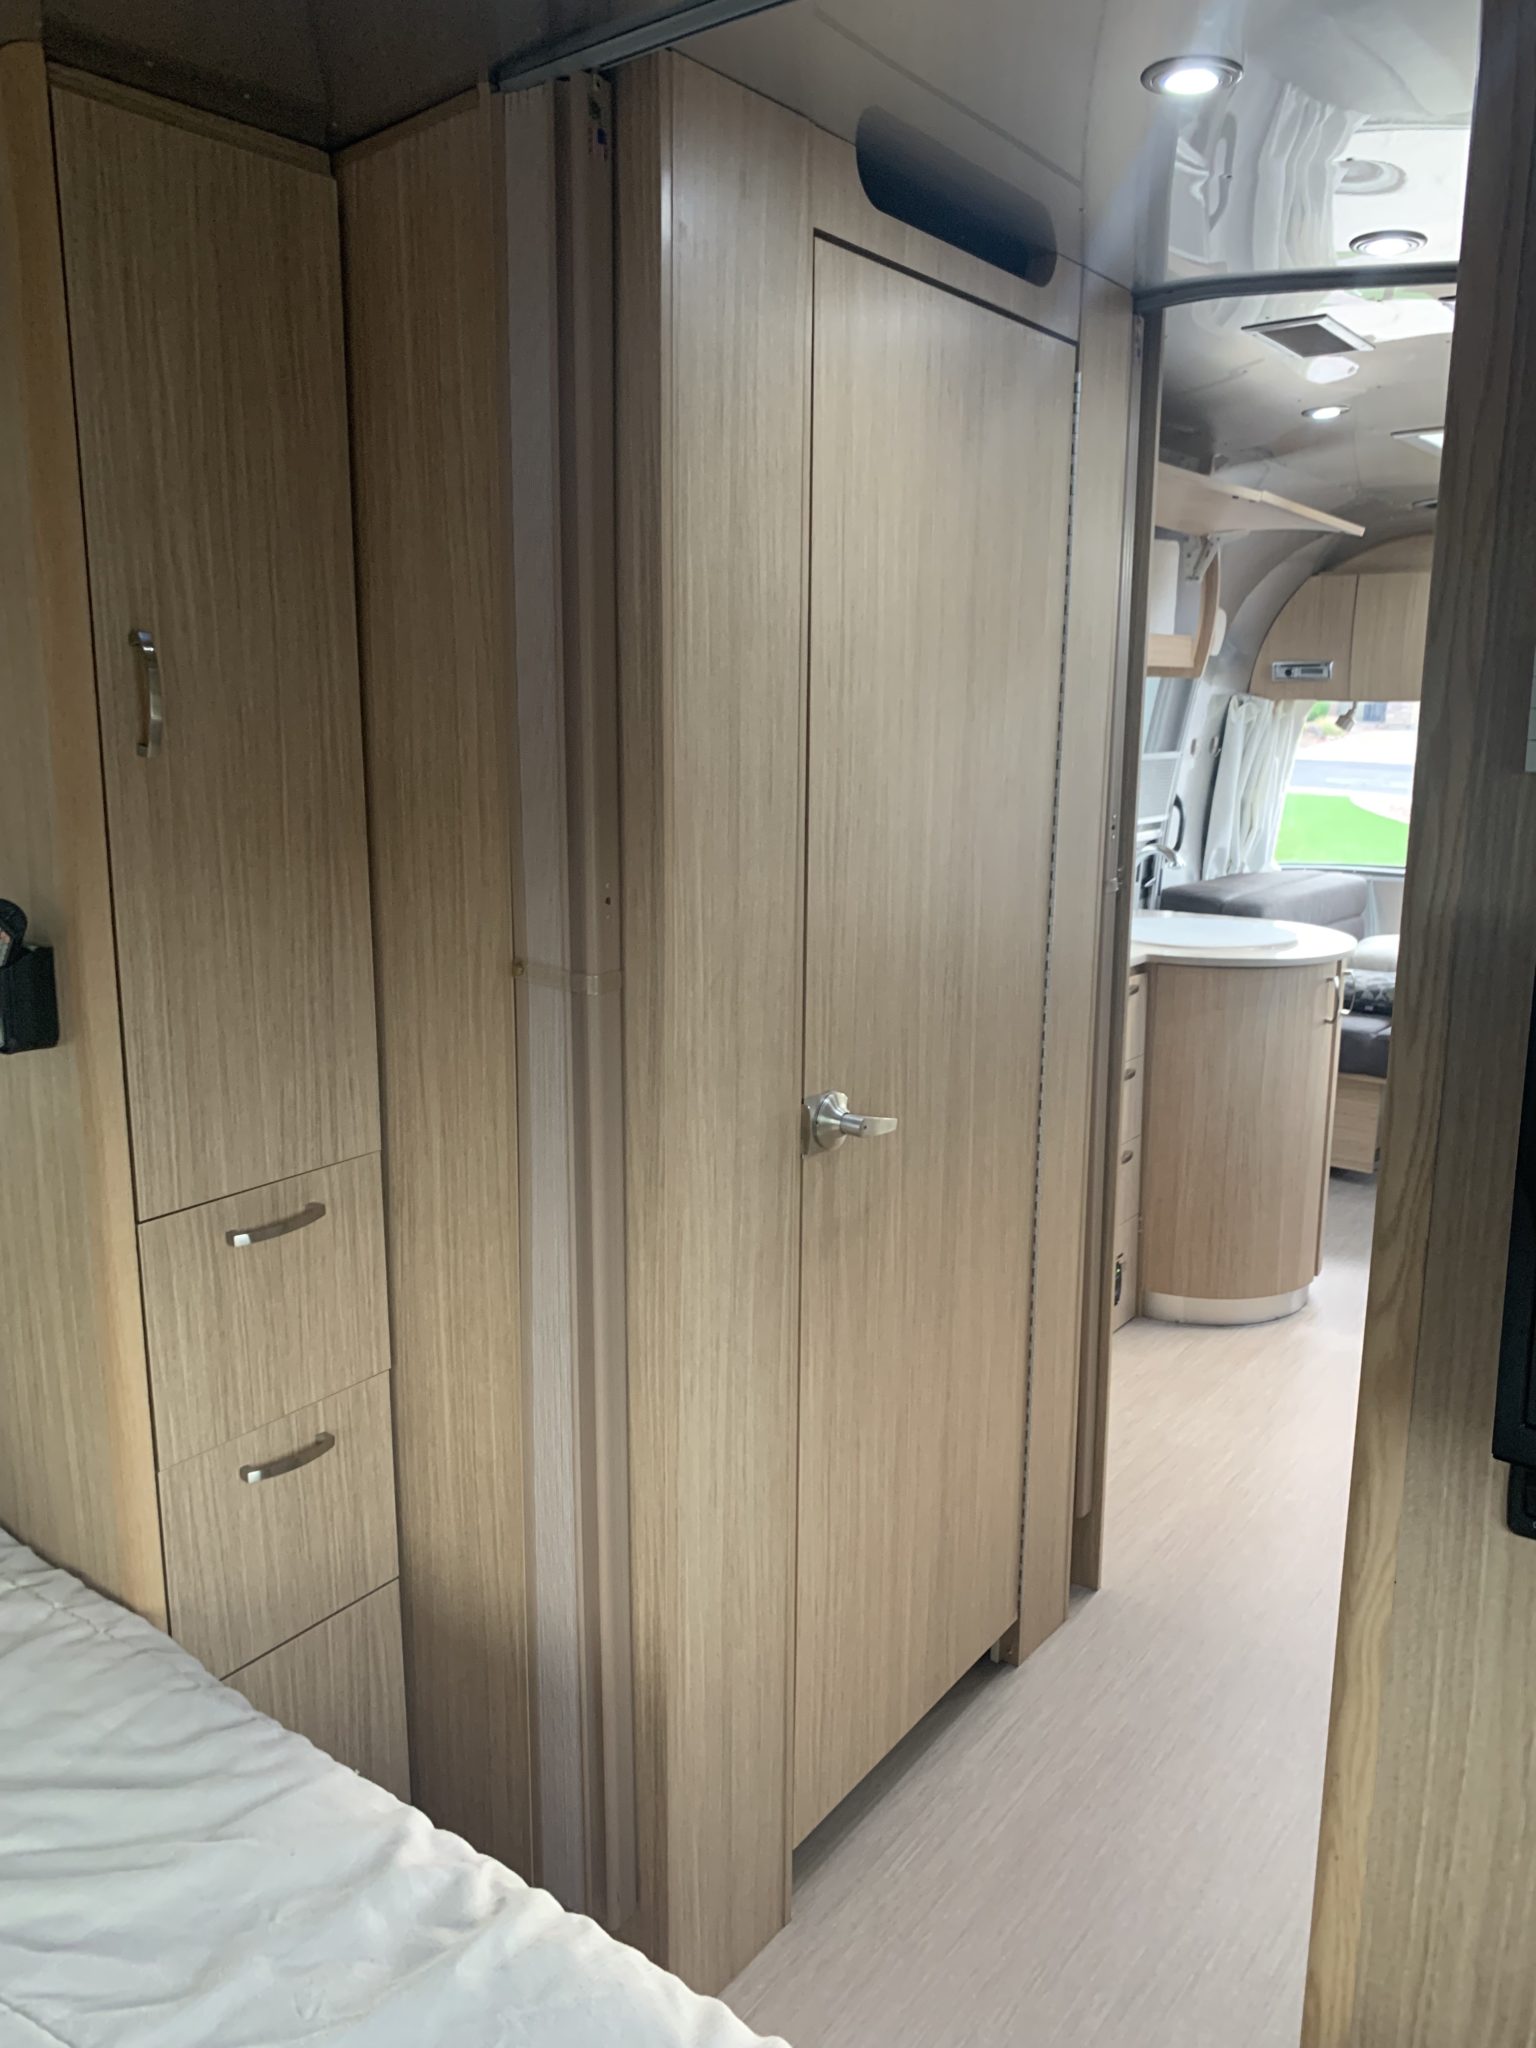 2018 Airstream 25FT Flying Cloud For Sale in Chandler - Airstream ...